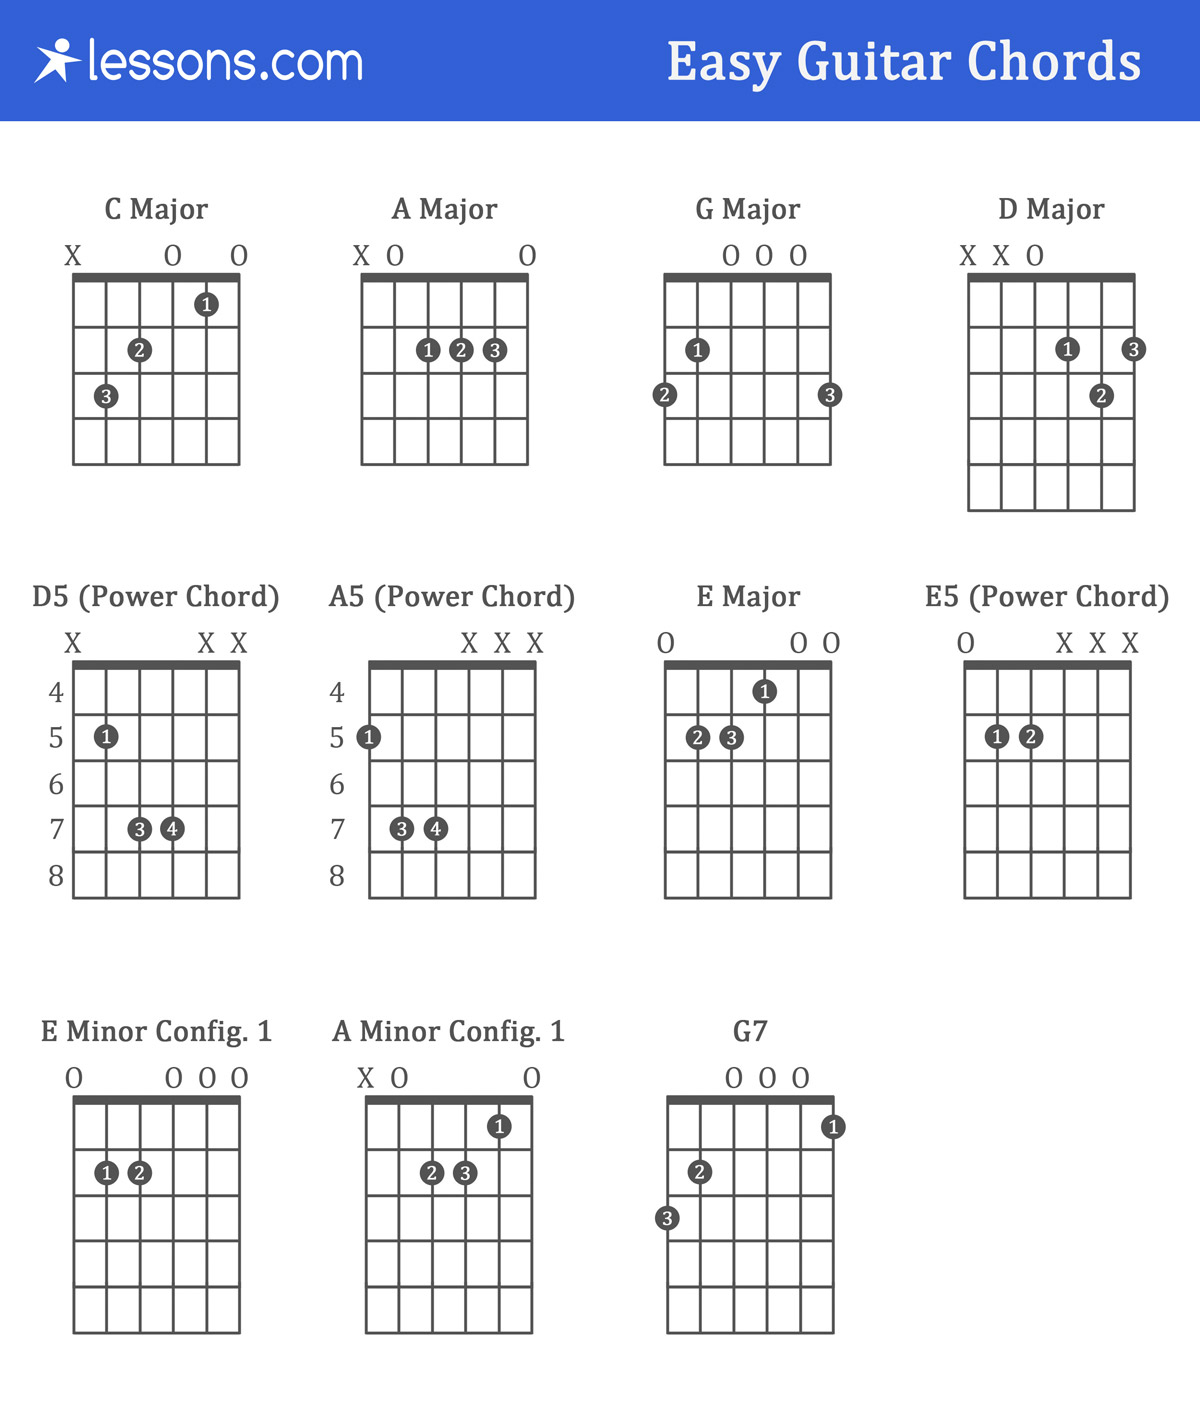 Basic Guitar Chords The 11 Easy Guitar Chords For Beginners With Charts Examples